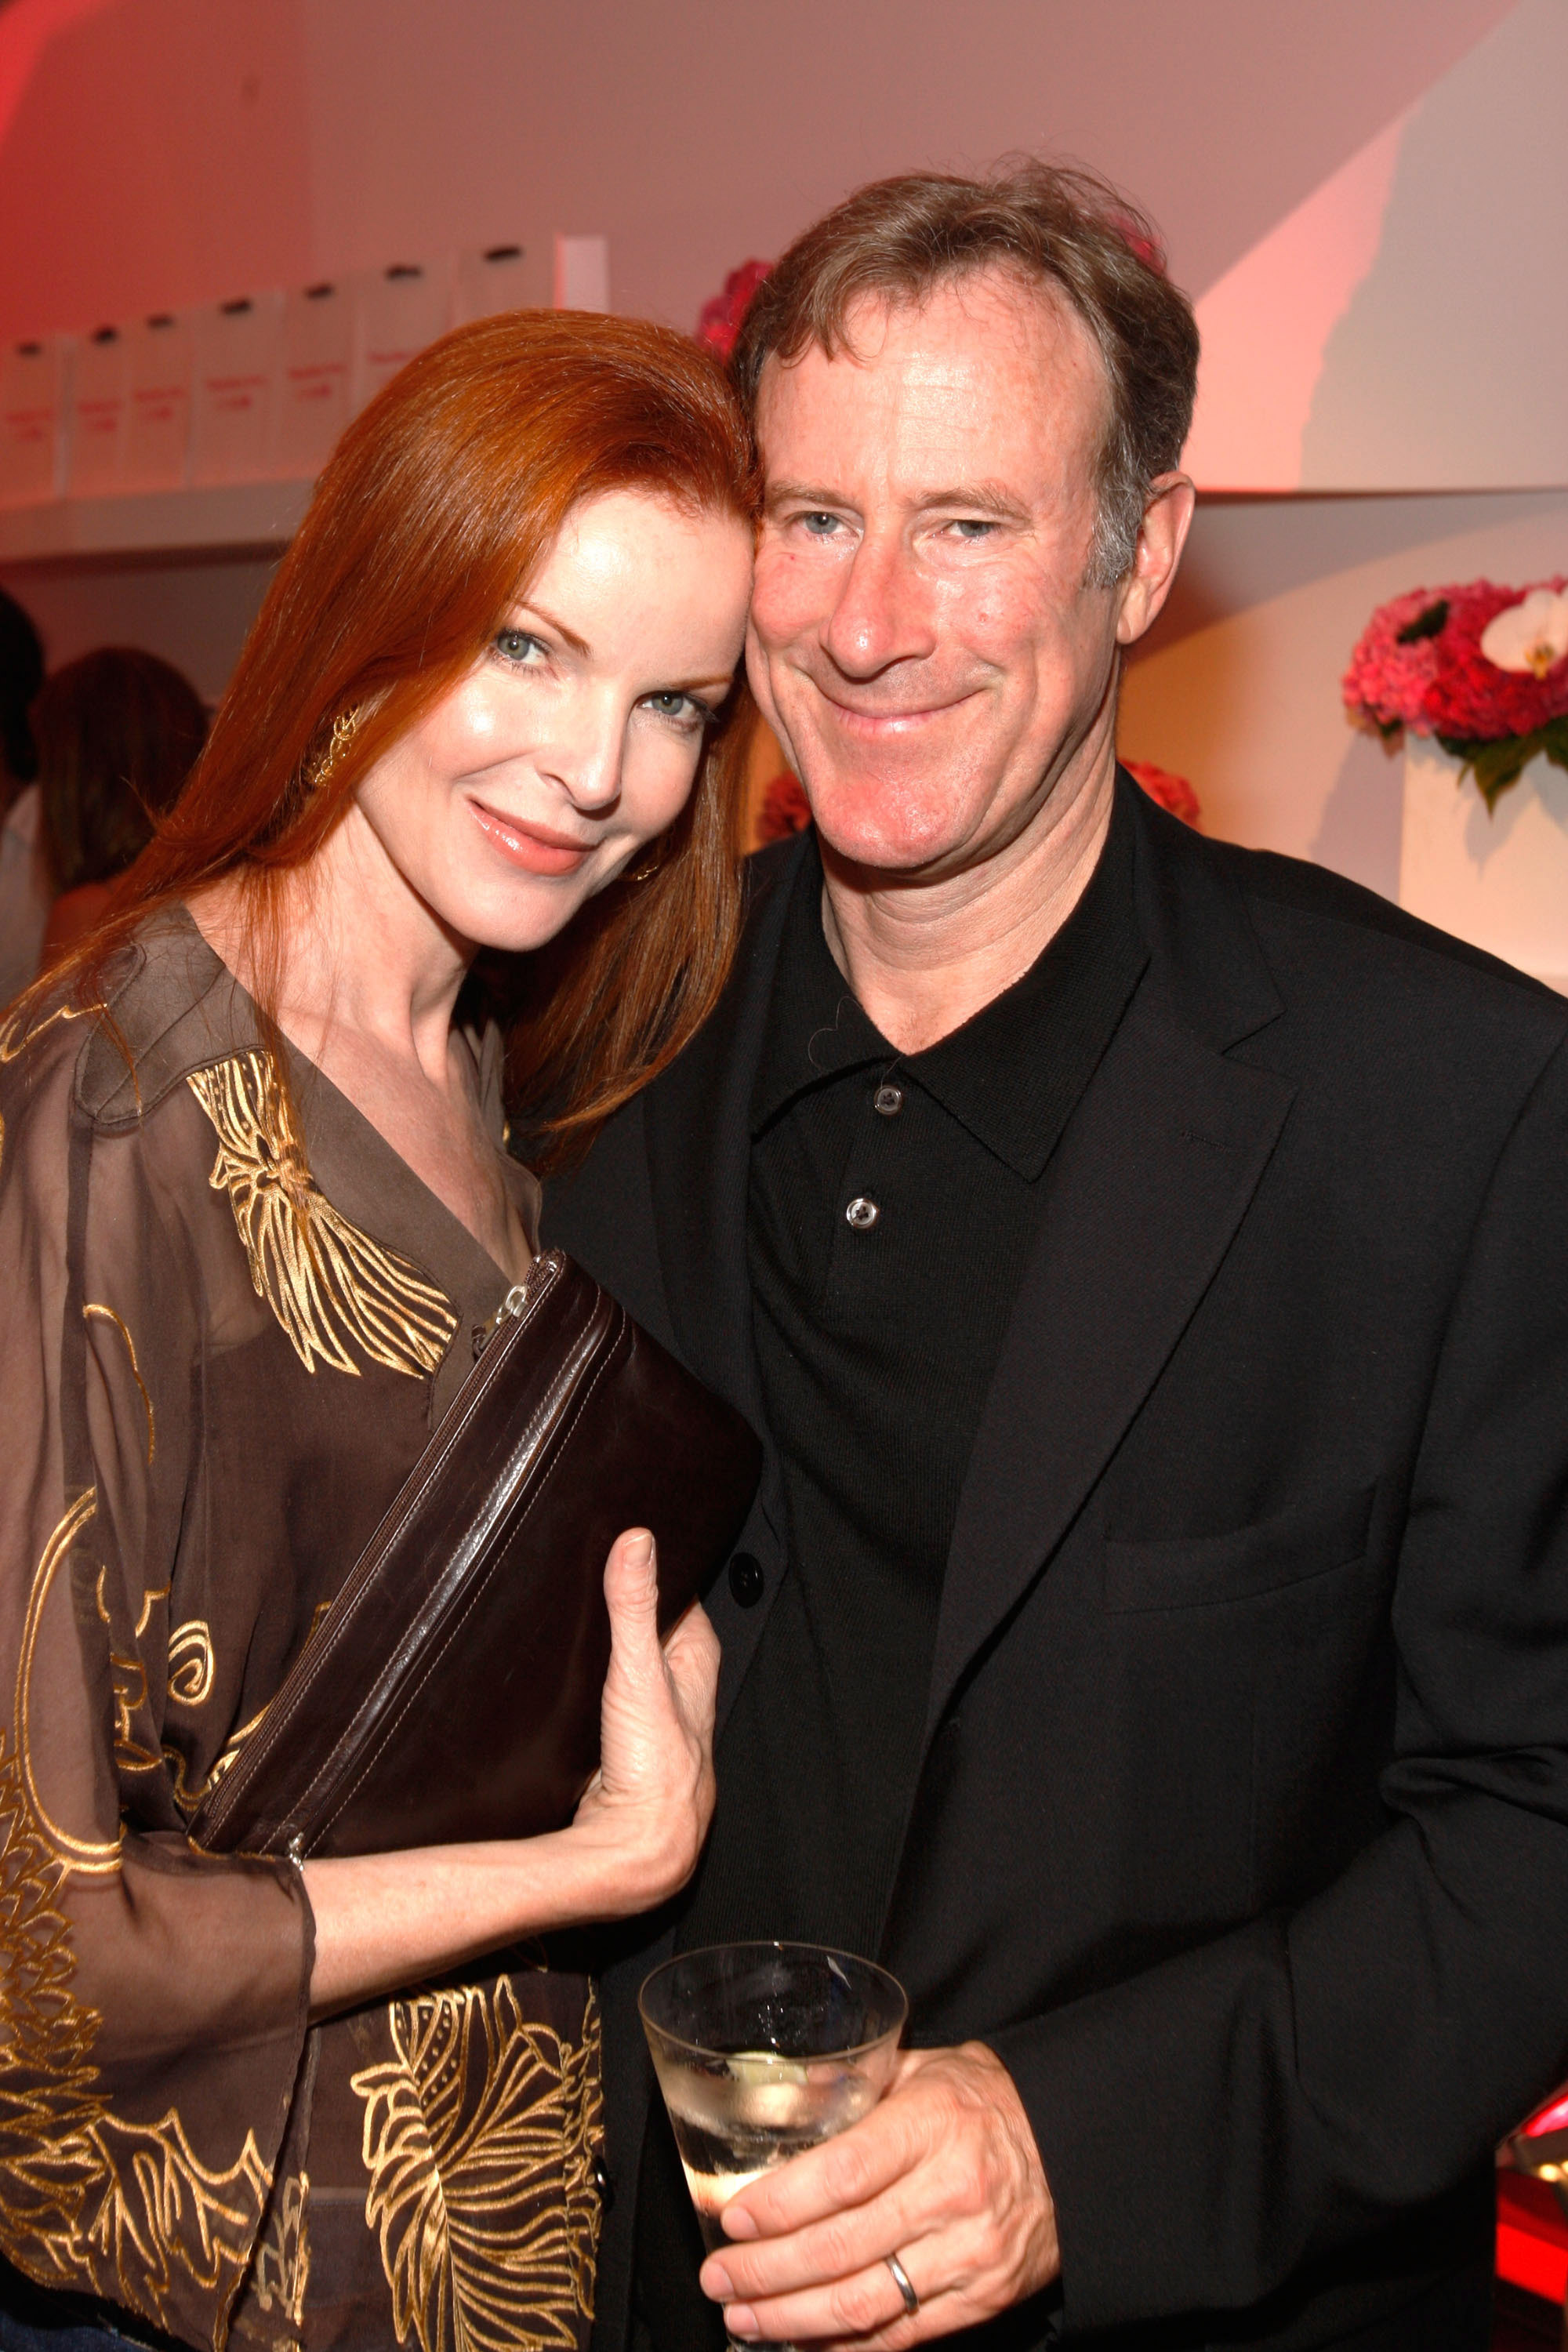 Marcia Cross and Tom Mahoney at the launch party for the BlackBerry 8330 Pink Curve on August 27, 2008, in Los Angeles, California. | Source: Getty Images